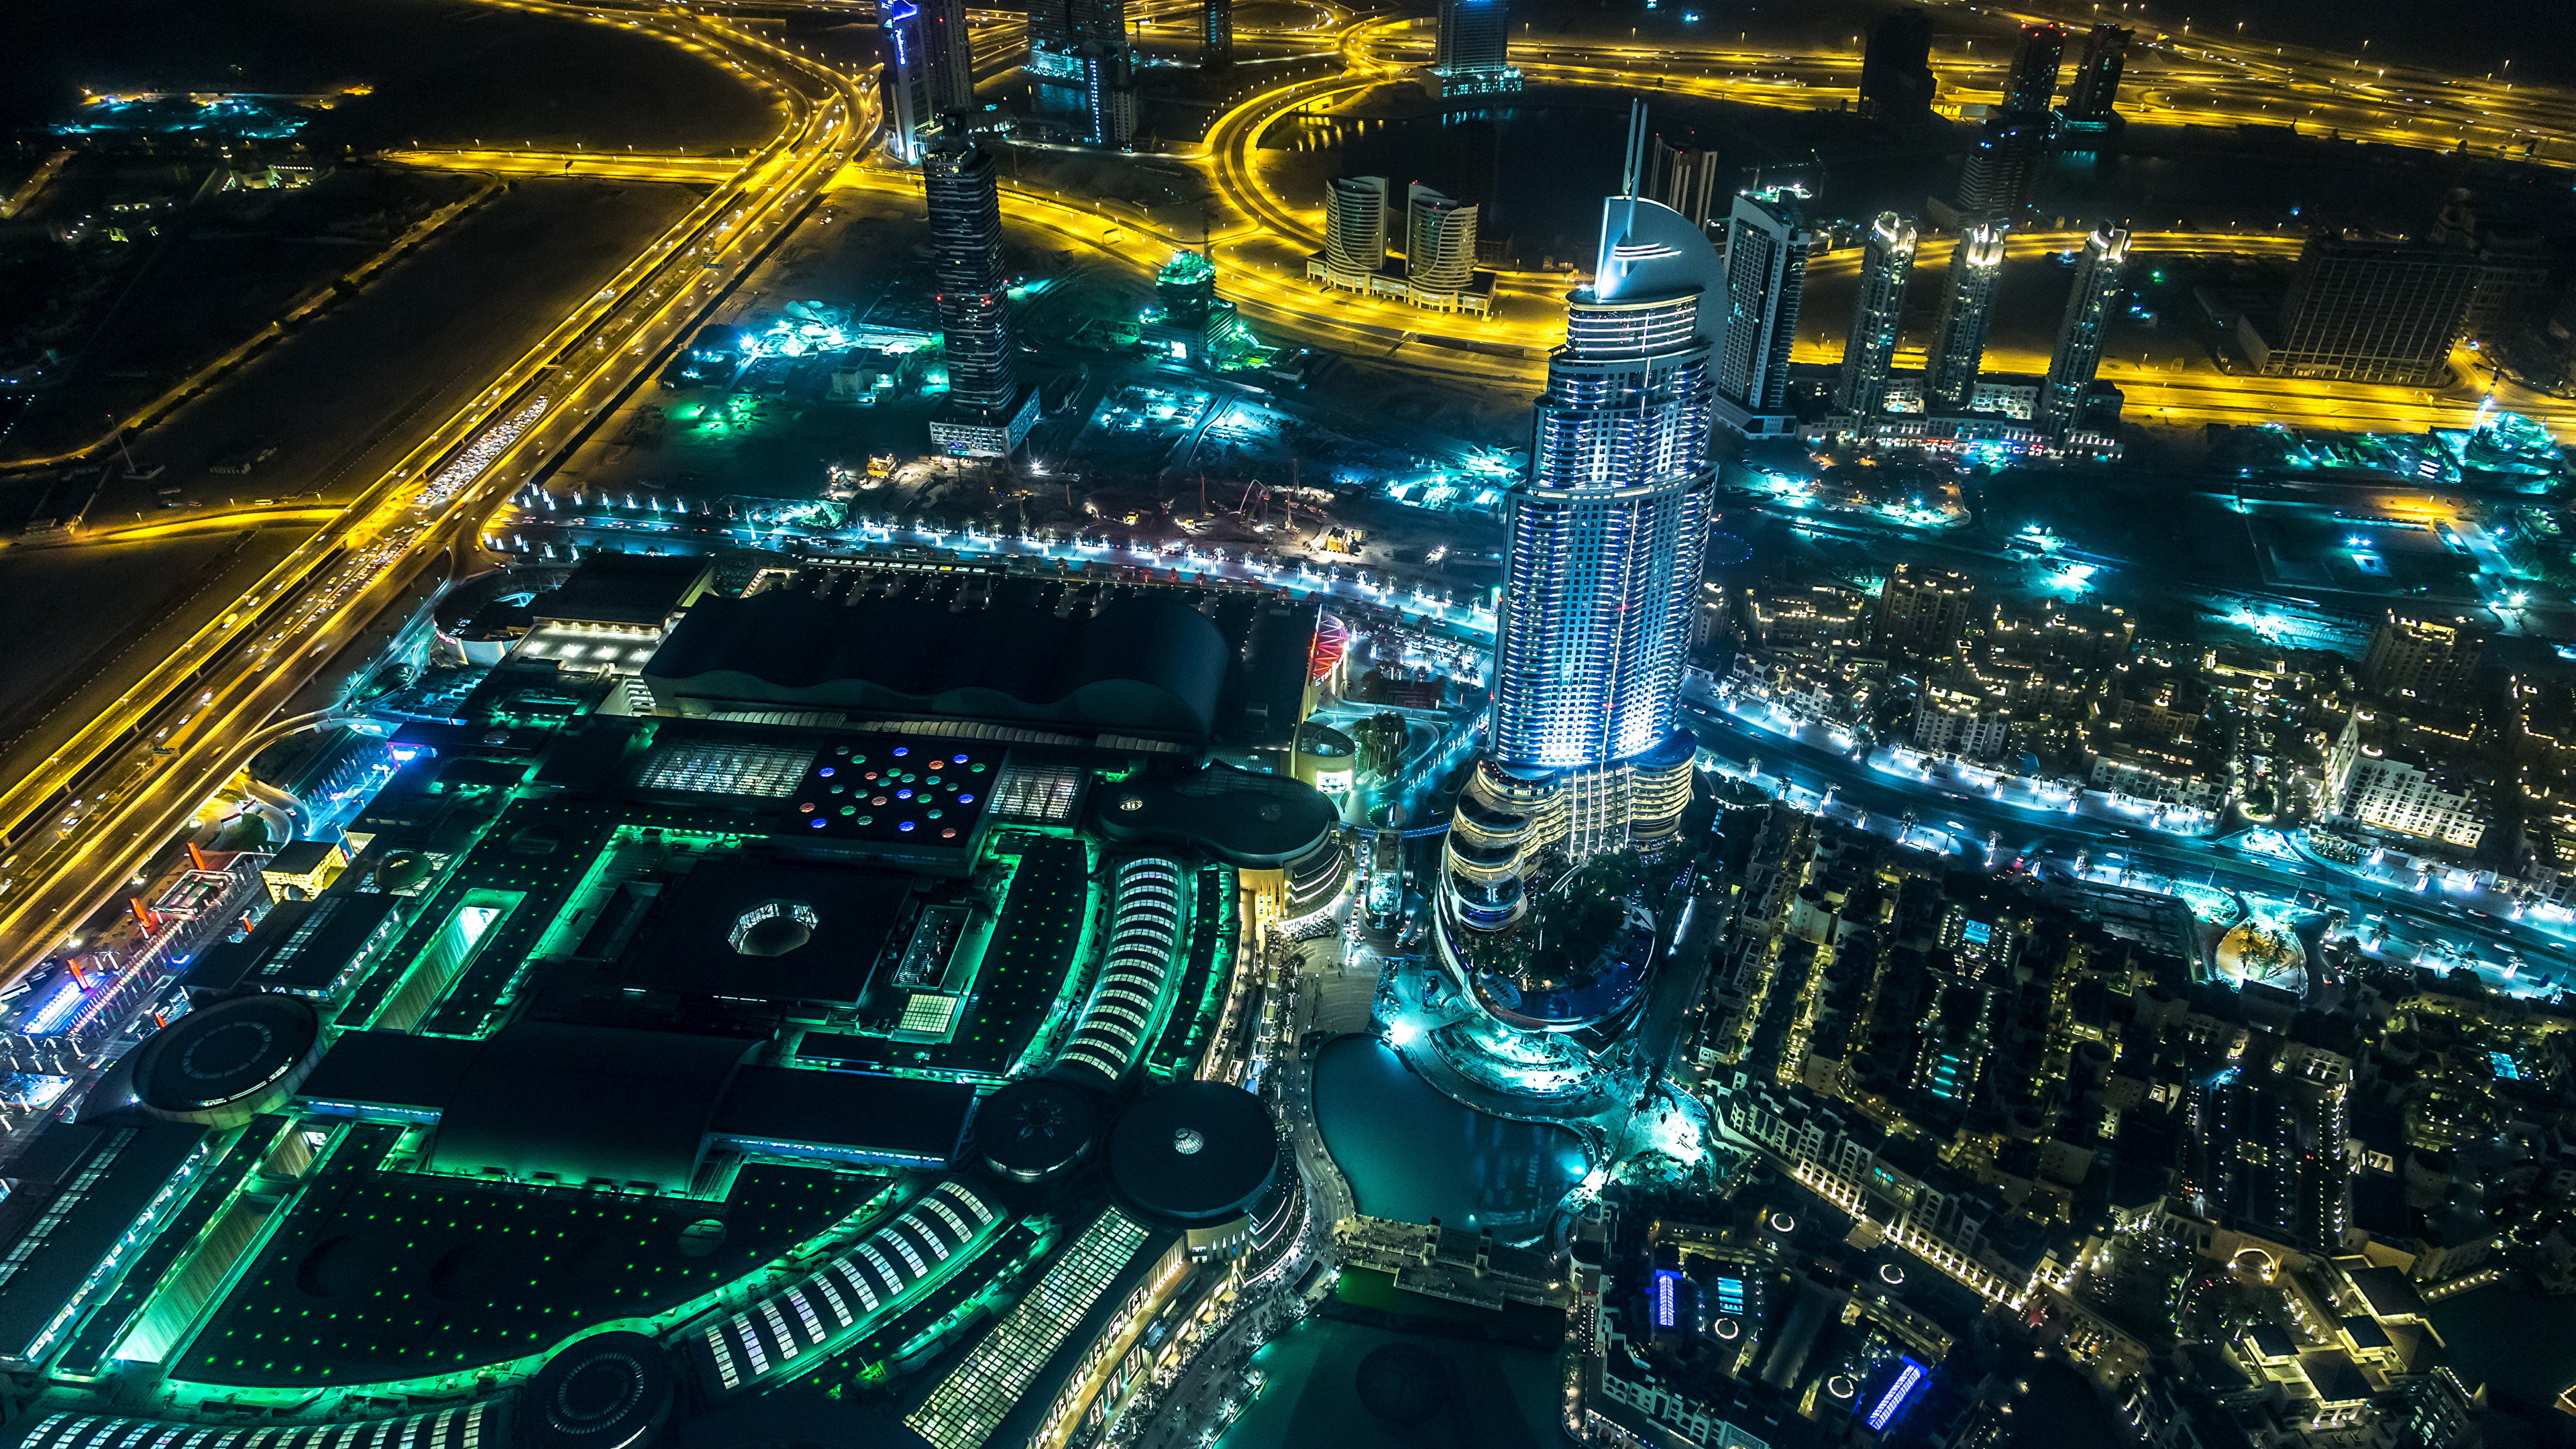 200+ Burj Khalifa Pictures and Wallpapers in HD - Pixabay